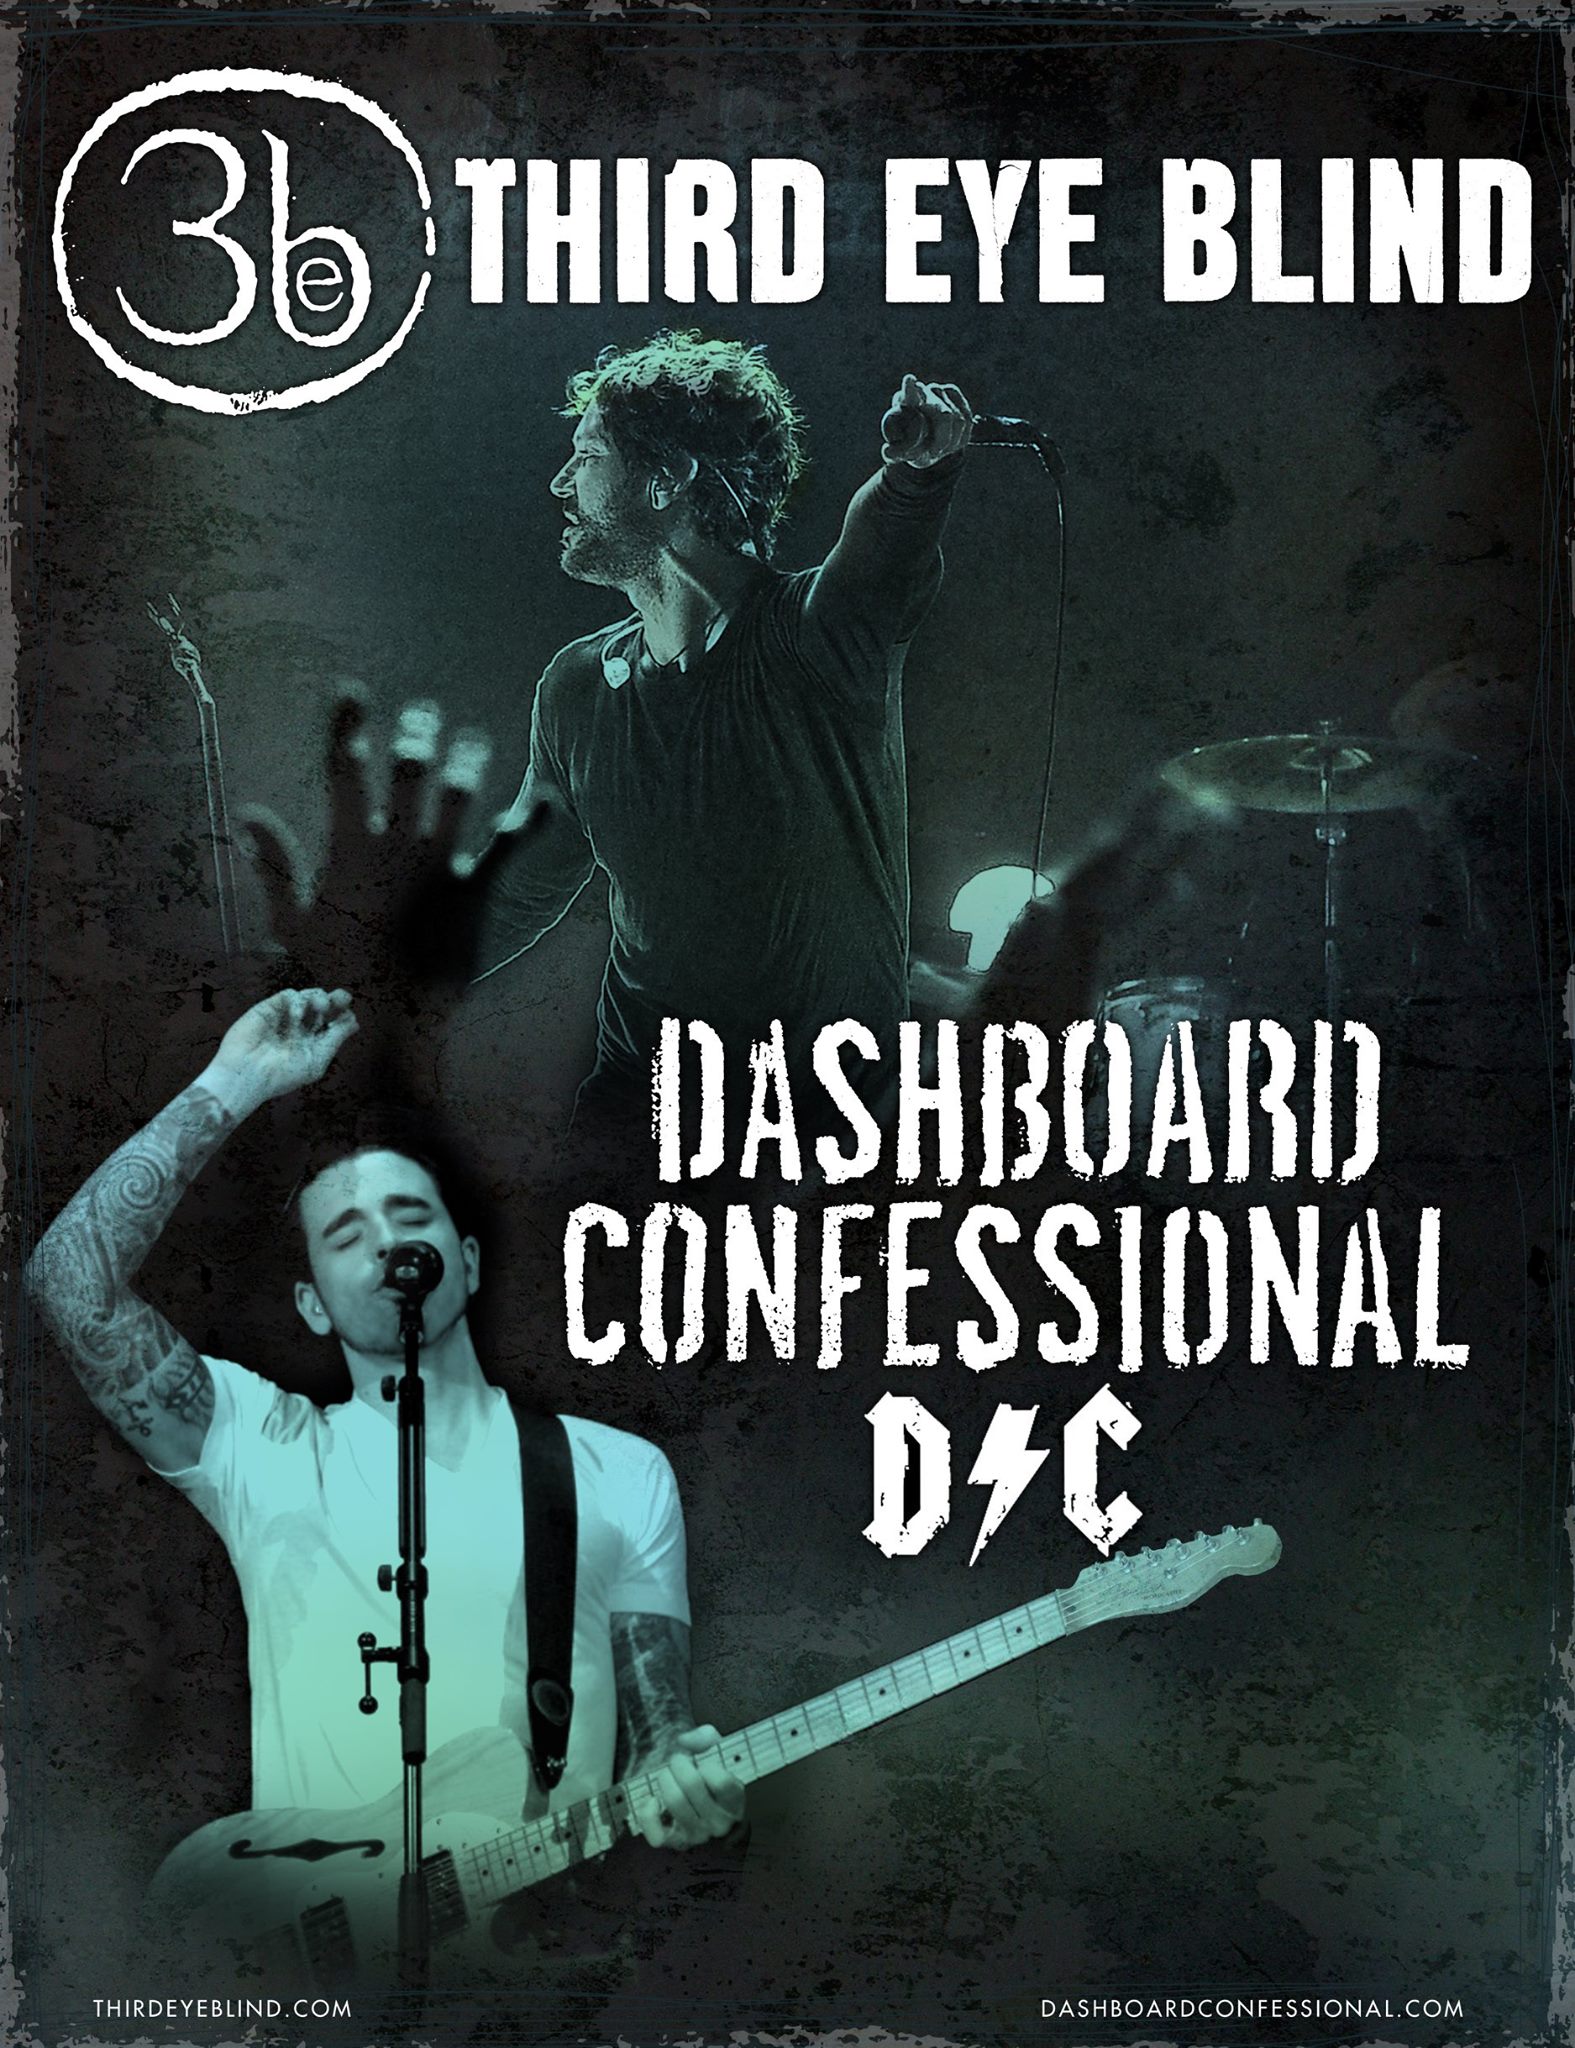 THIRD EYE BLIND and DASHBOARD CONFESSIONAL ANNOUNCE 2015 SUMMER TOUR